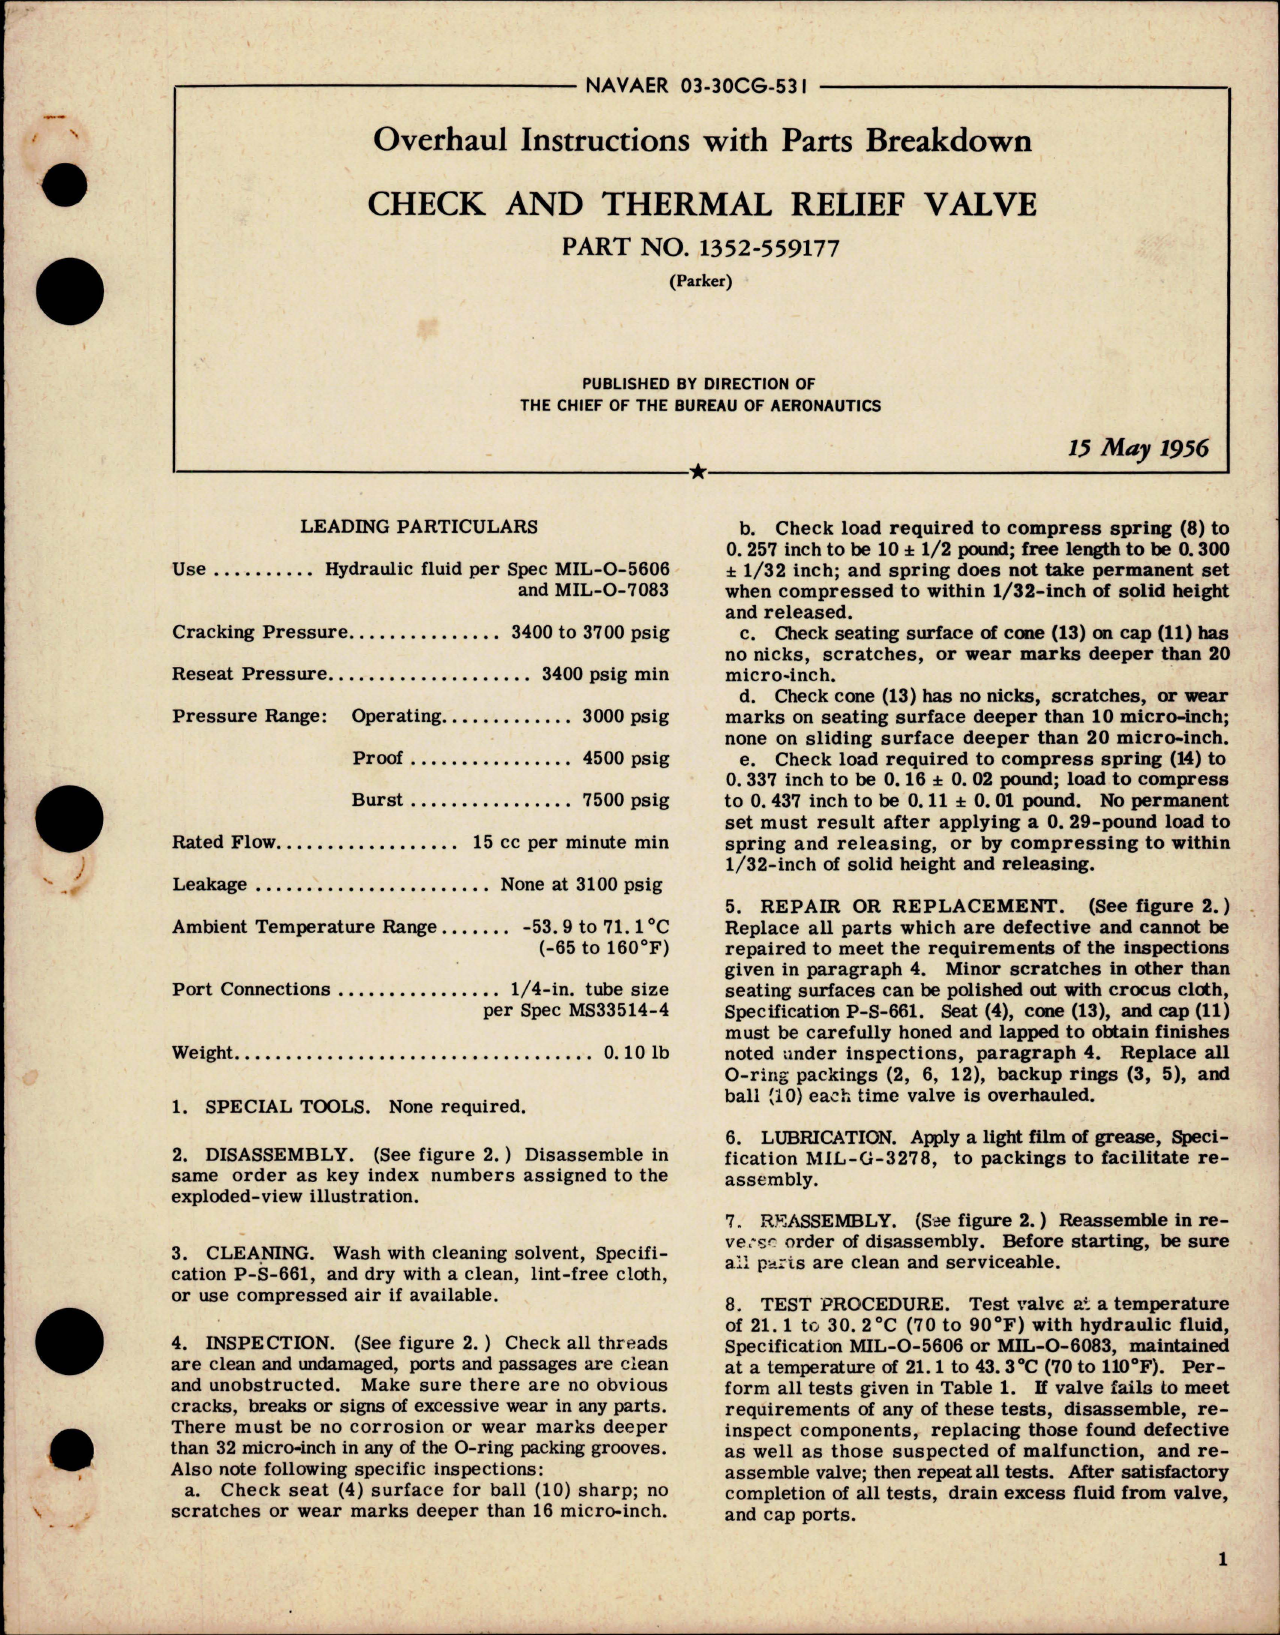 Sample page 1 from AirCorps Library document: Overhaul Instructions with Parts Breakdown for Check and Thermal Relief Valve - Part 1352-559177 